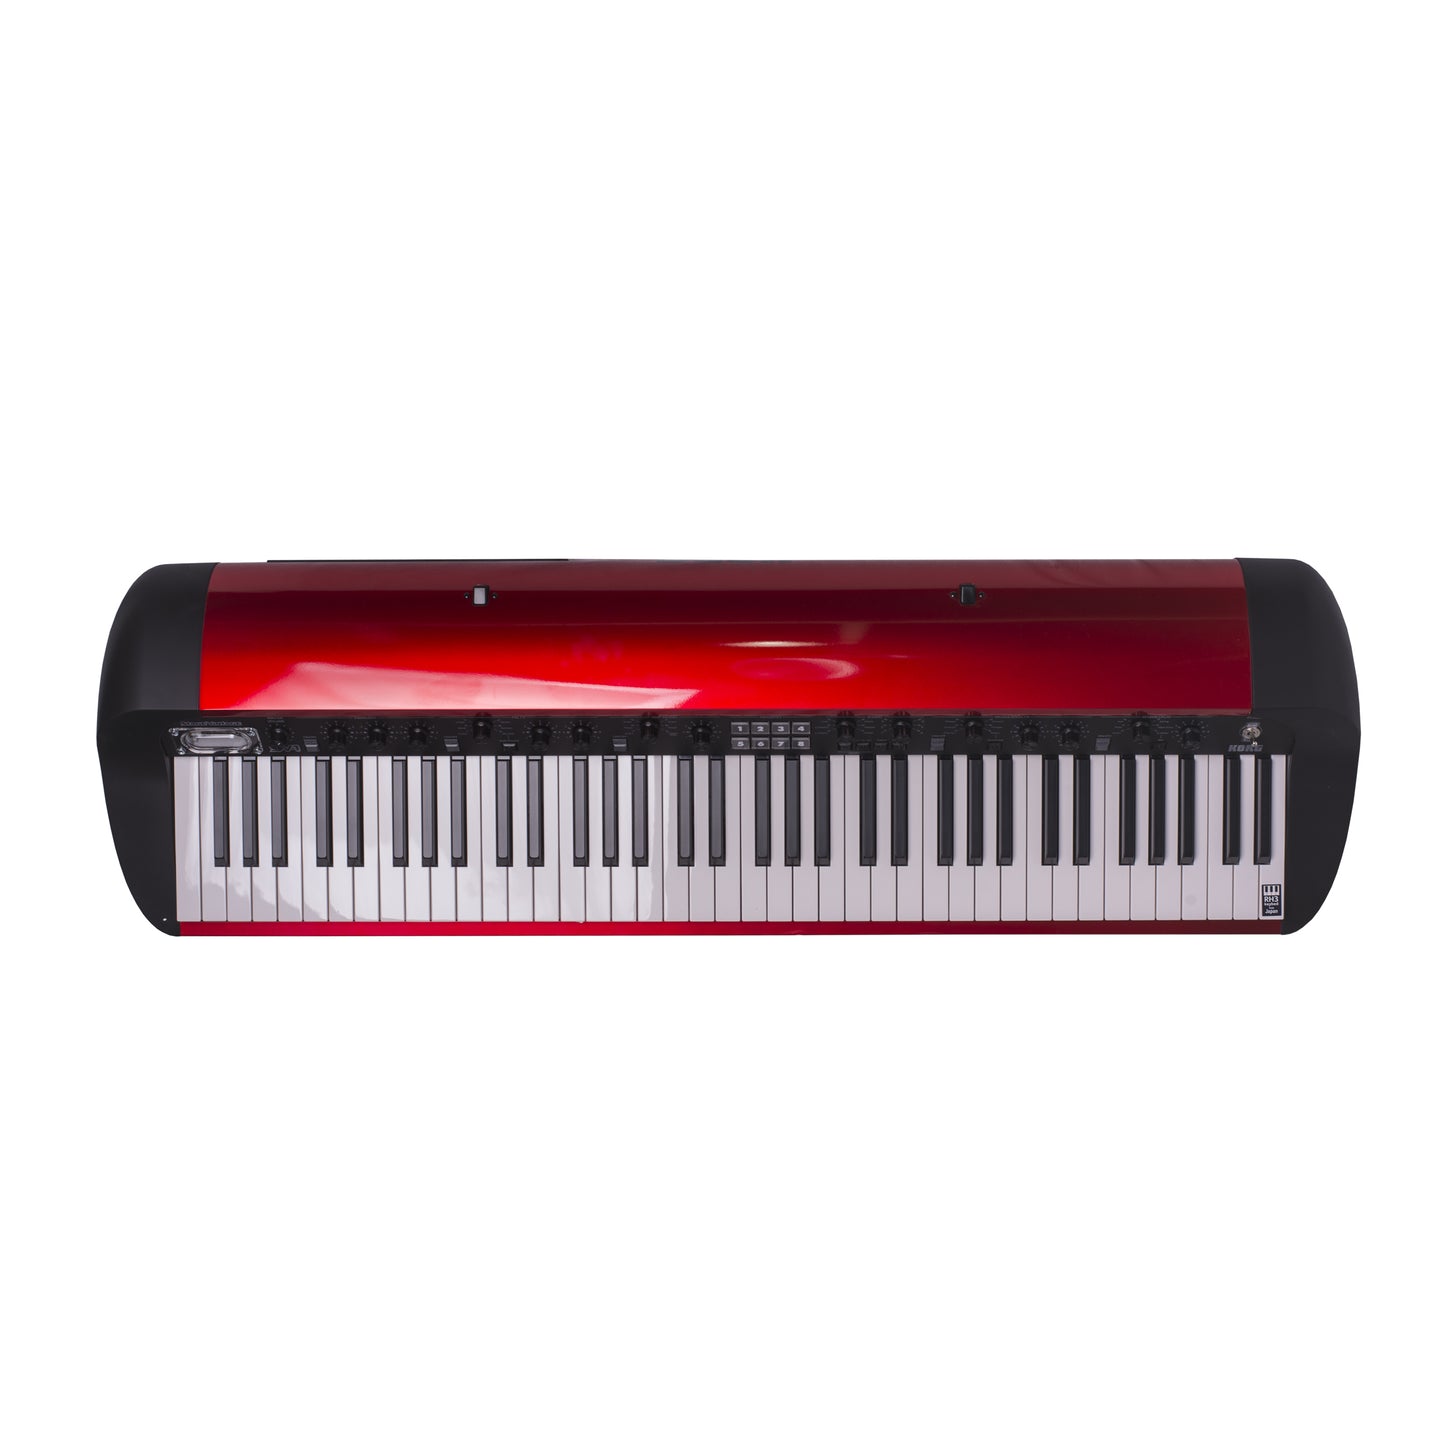 Korg SV-1 73-Key Limited Edition Vintage Stage Piano (Metallic Red)